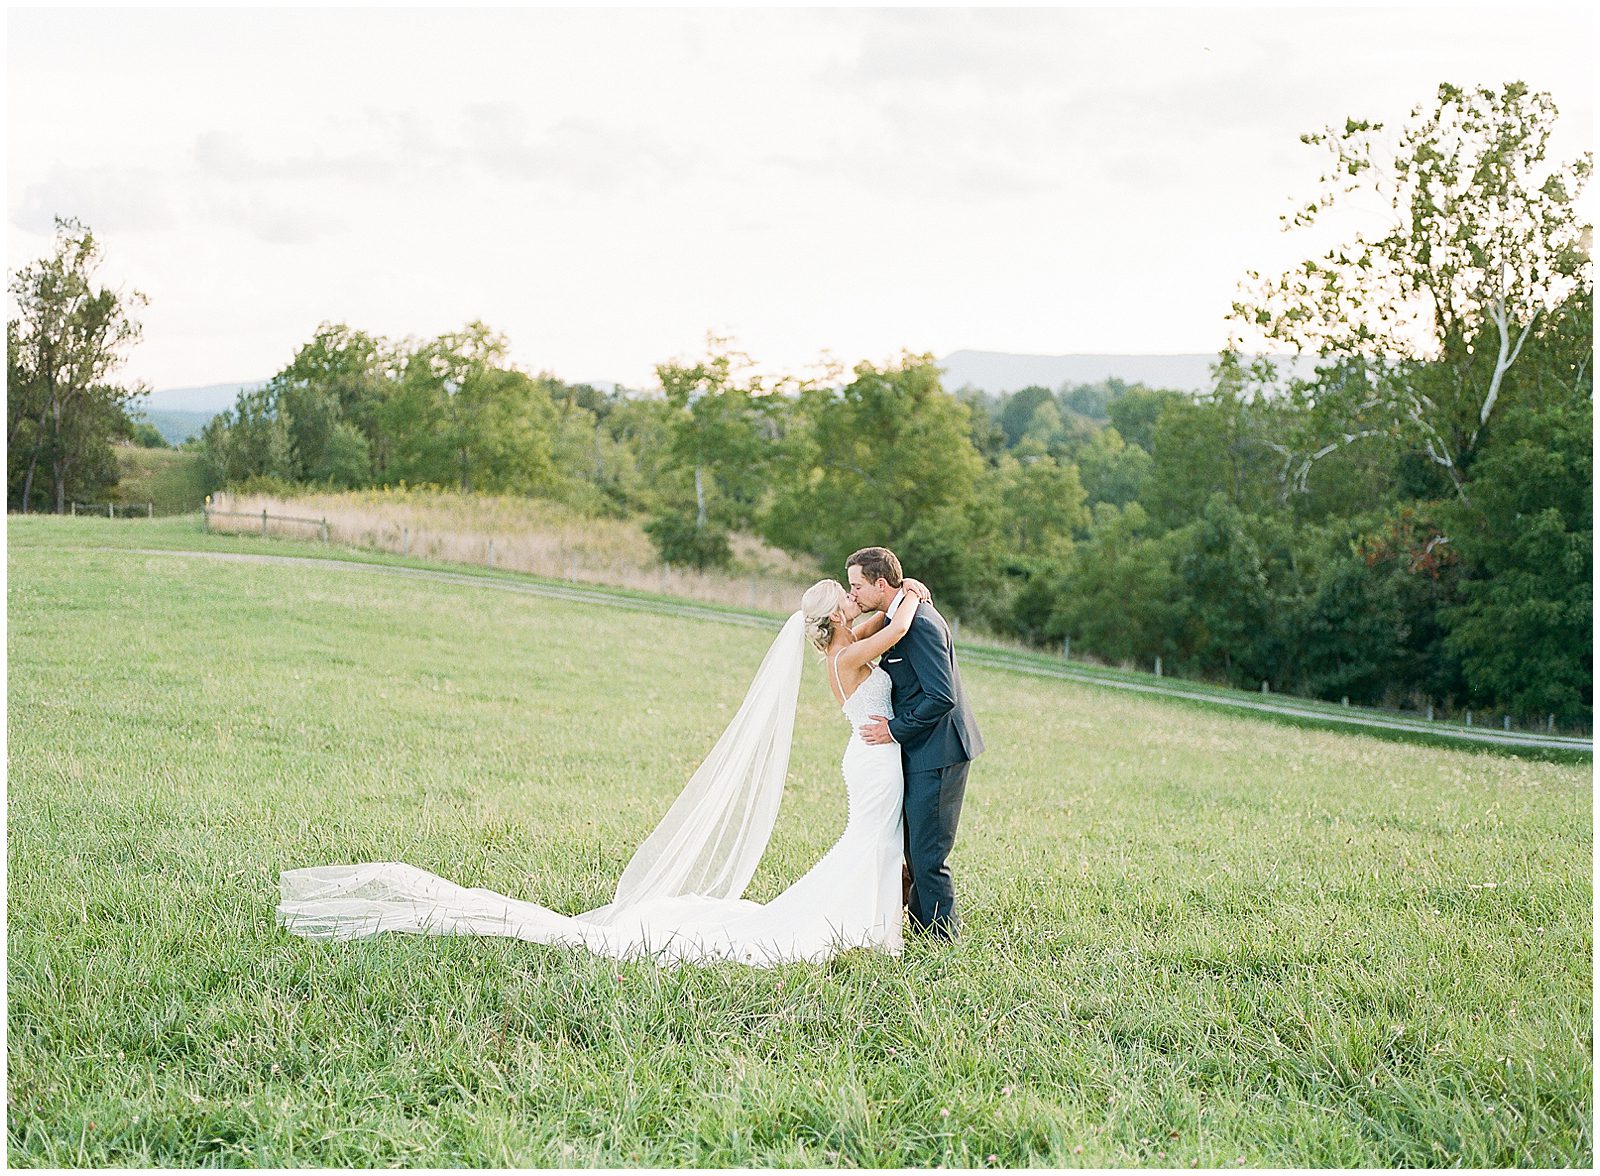 Bride and Groom Kissing In Field Photo